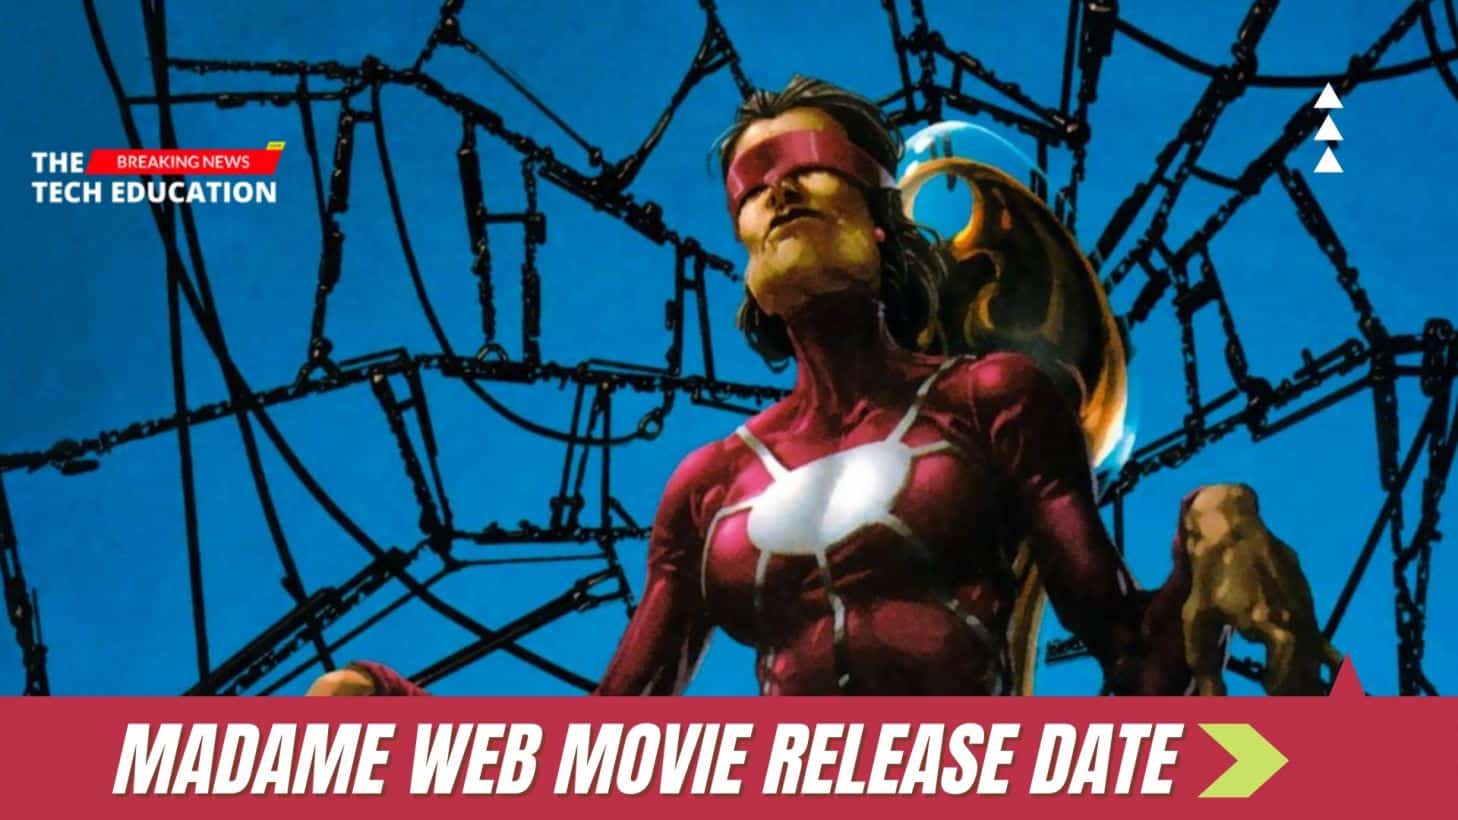 Madame Web Release Date Confirmed: Spider-Man Spinoff Movie Arrives in 2023